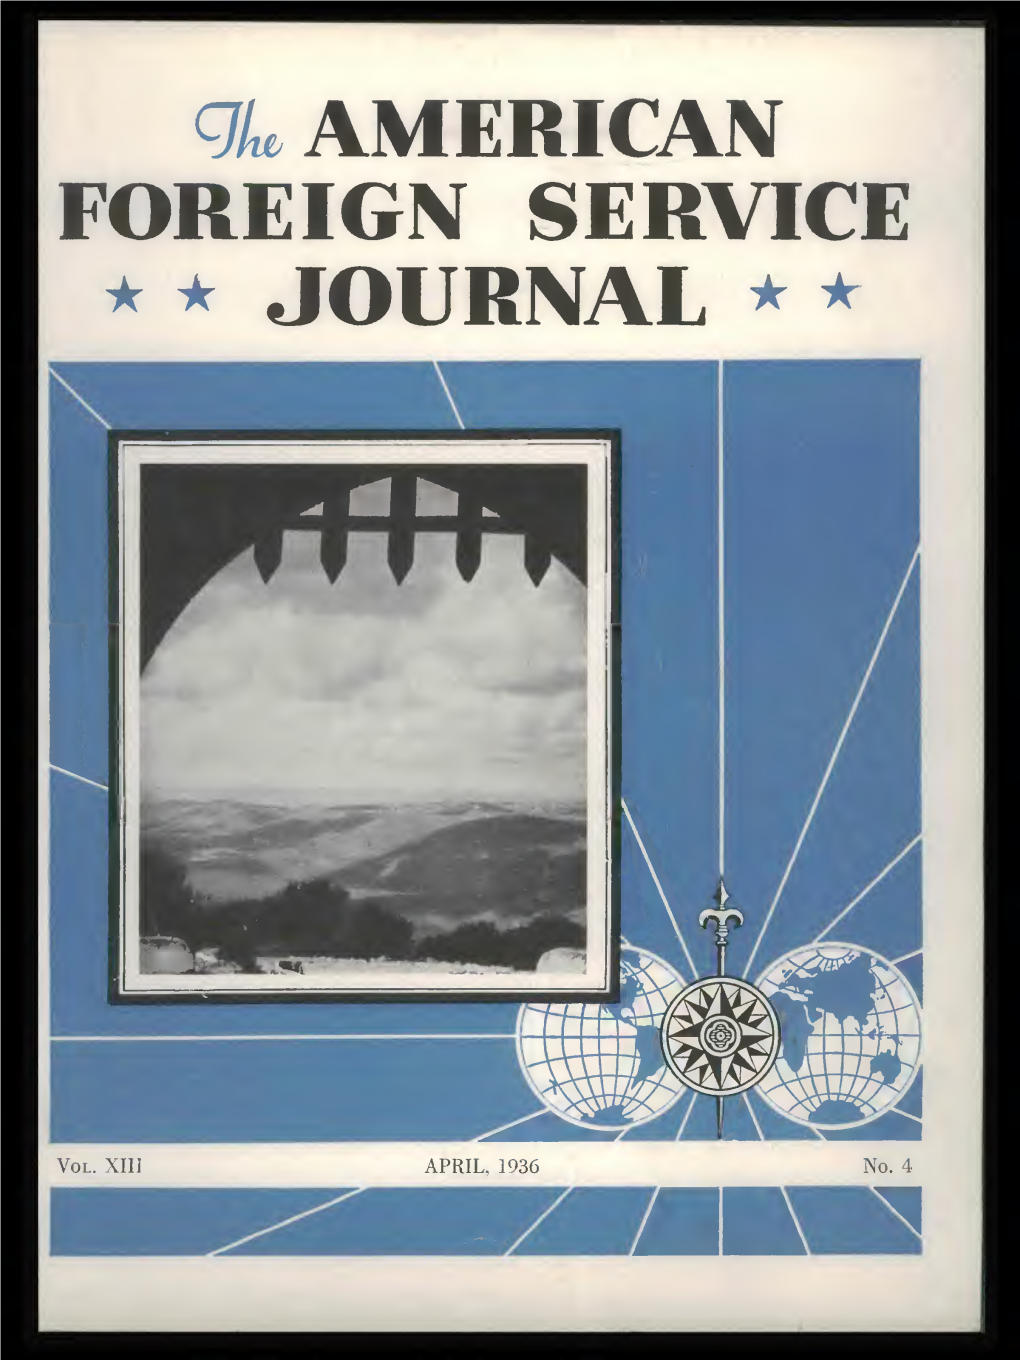 The Foreign Service Journal, April 1936